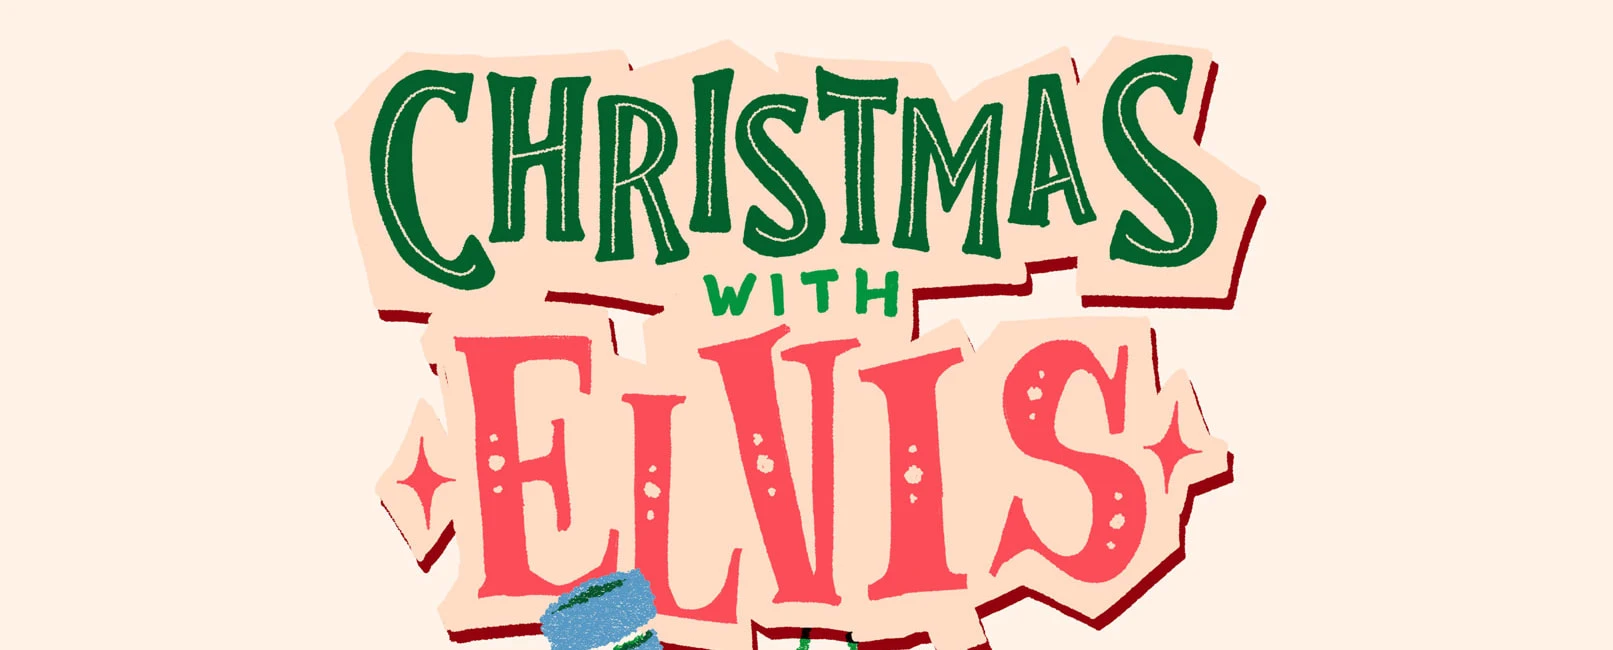 Christmas With Elvis: What to expect - 1